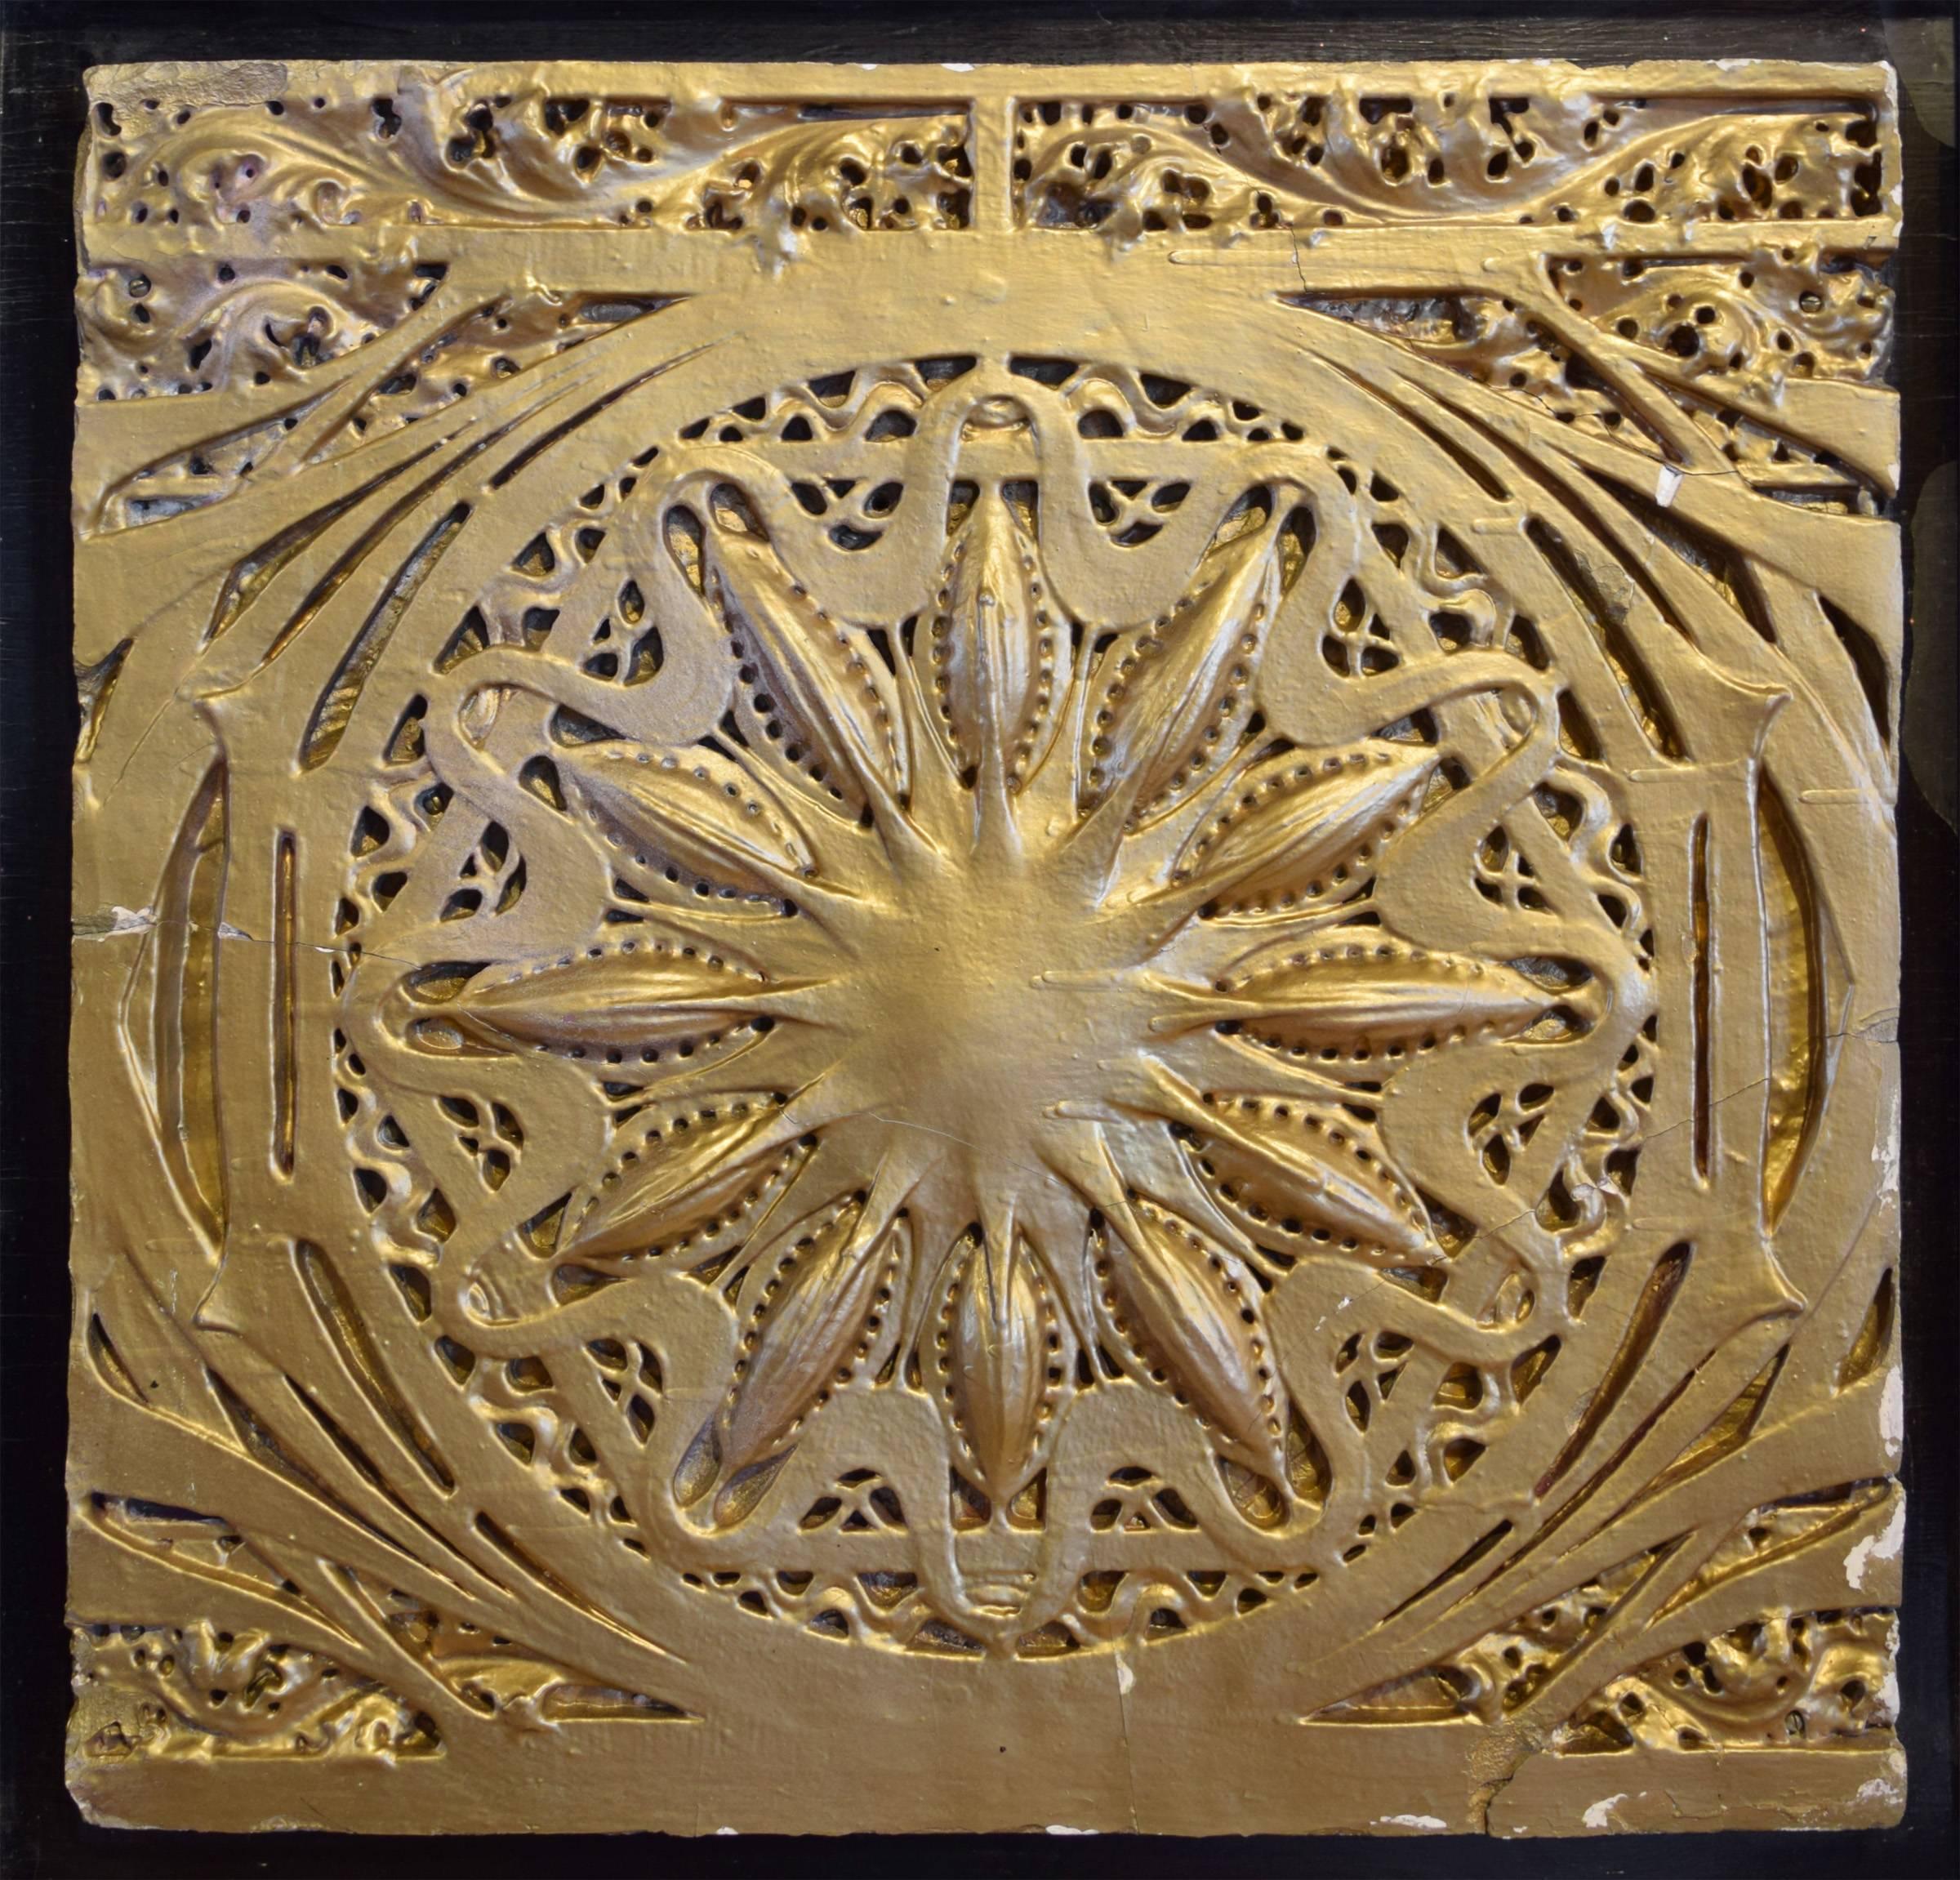 Louis Sullivan designed painted plaster panel from the proscenium arch of the Schiller Theater by architects Adler & Sullivan, 1892, mounted in a custom presentation frame. At the time of its construction the building, at 64 W. Randolph street, was